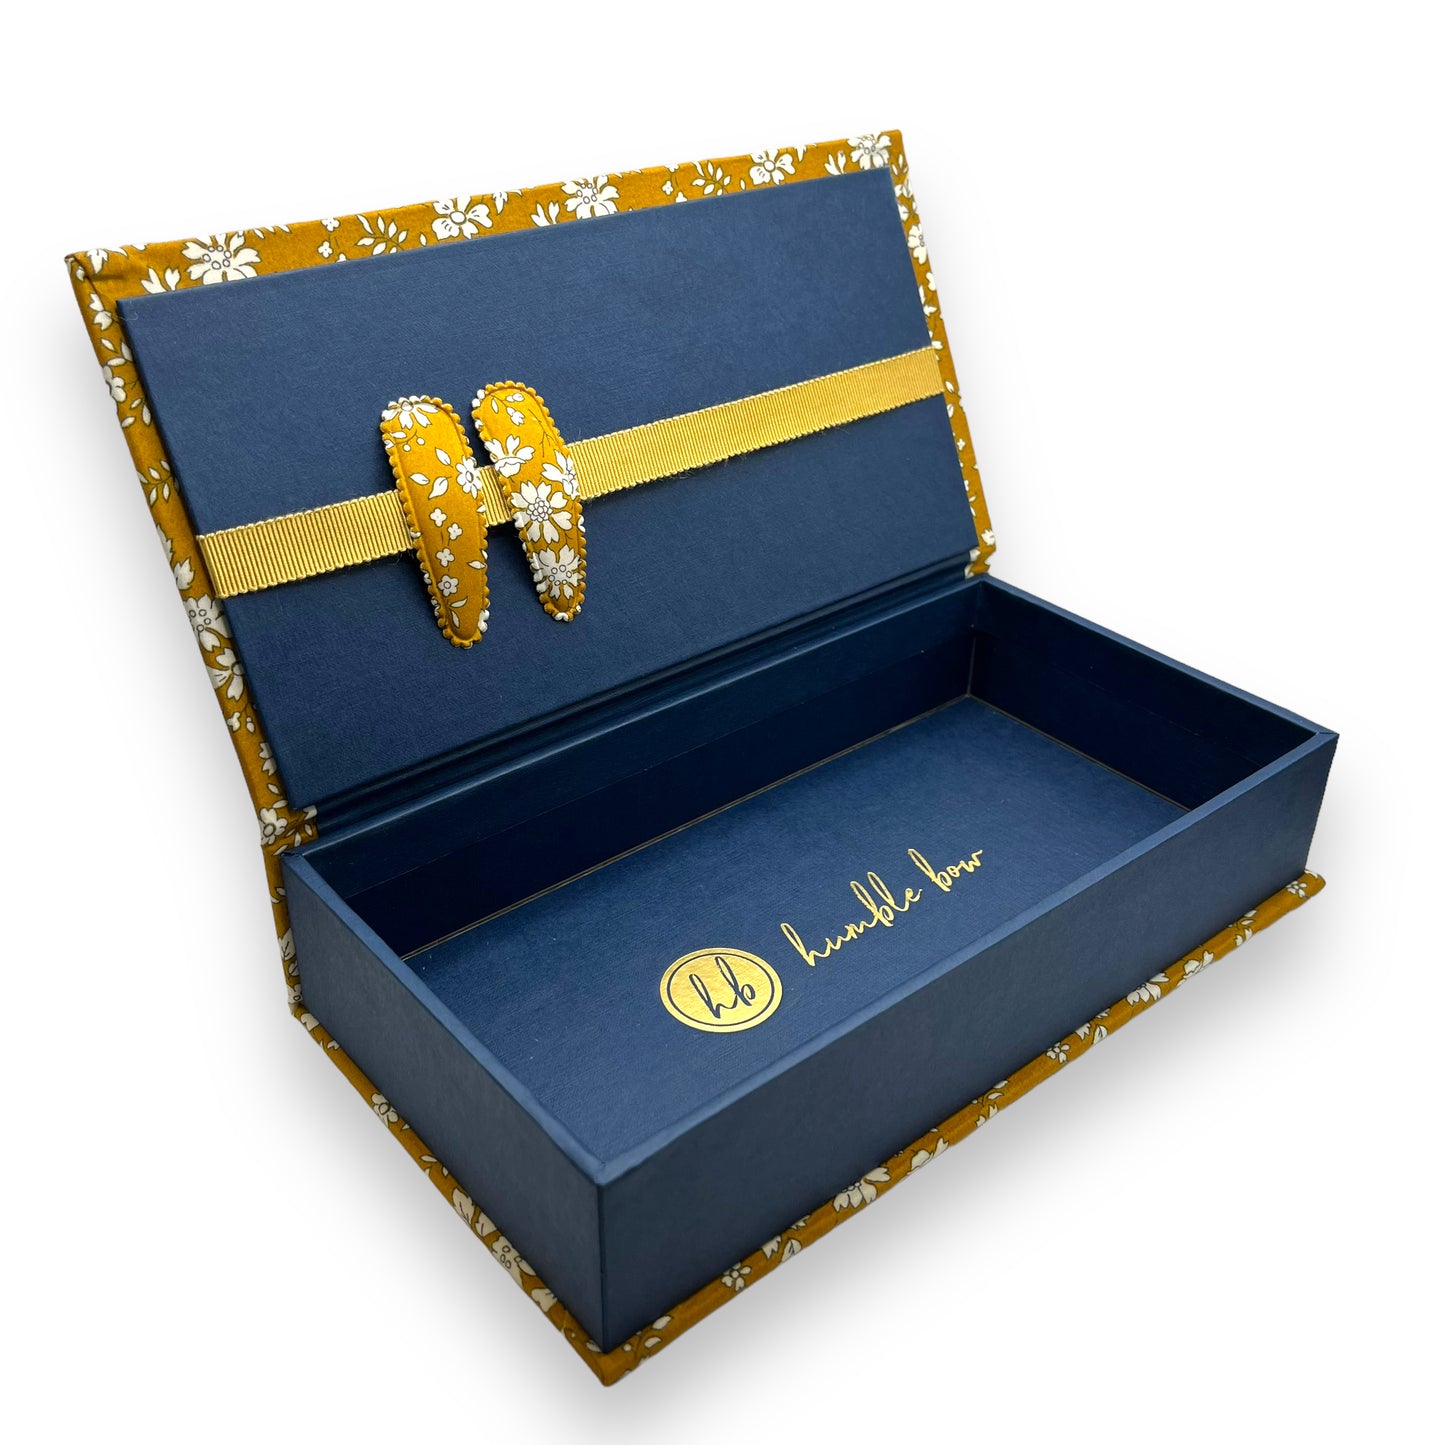 Fabric Wrapped Box - Liberty Capel Gold